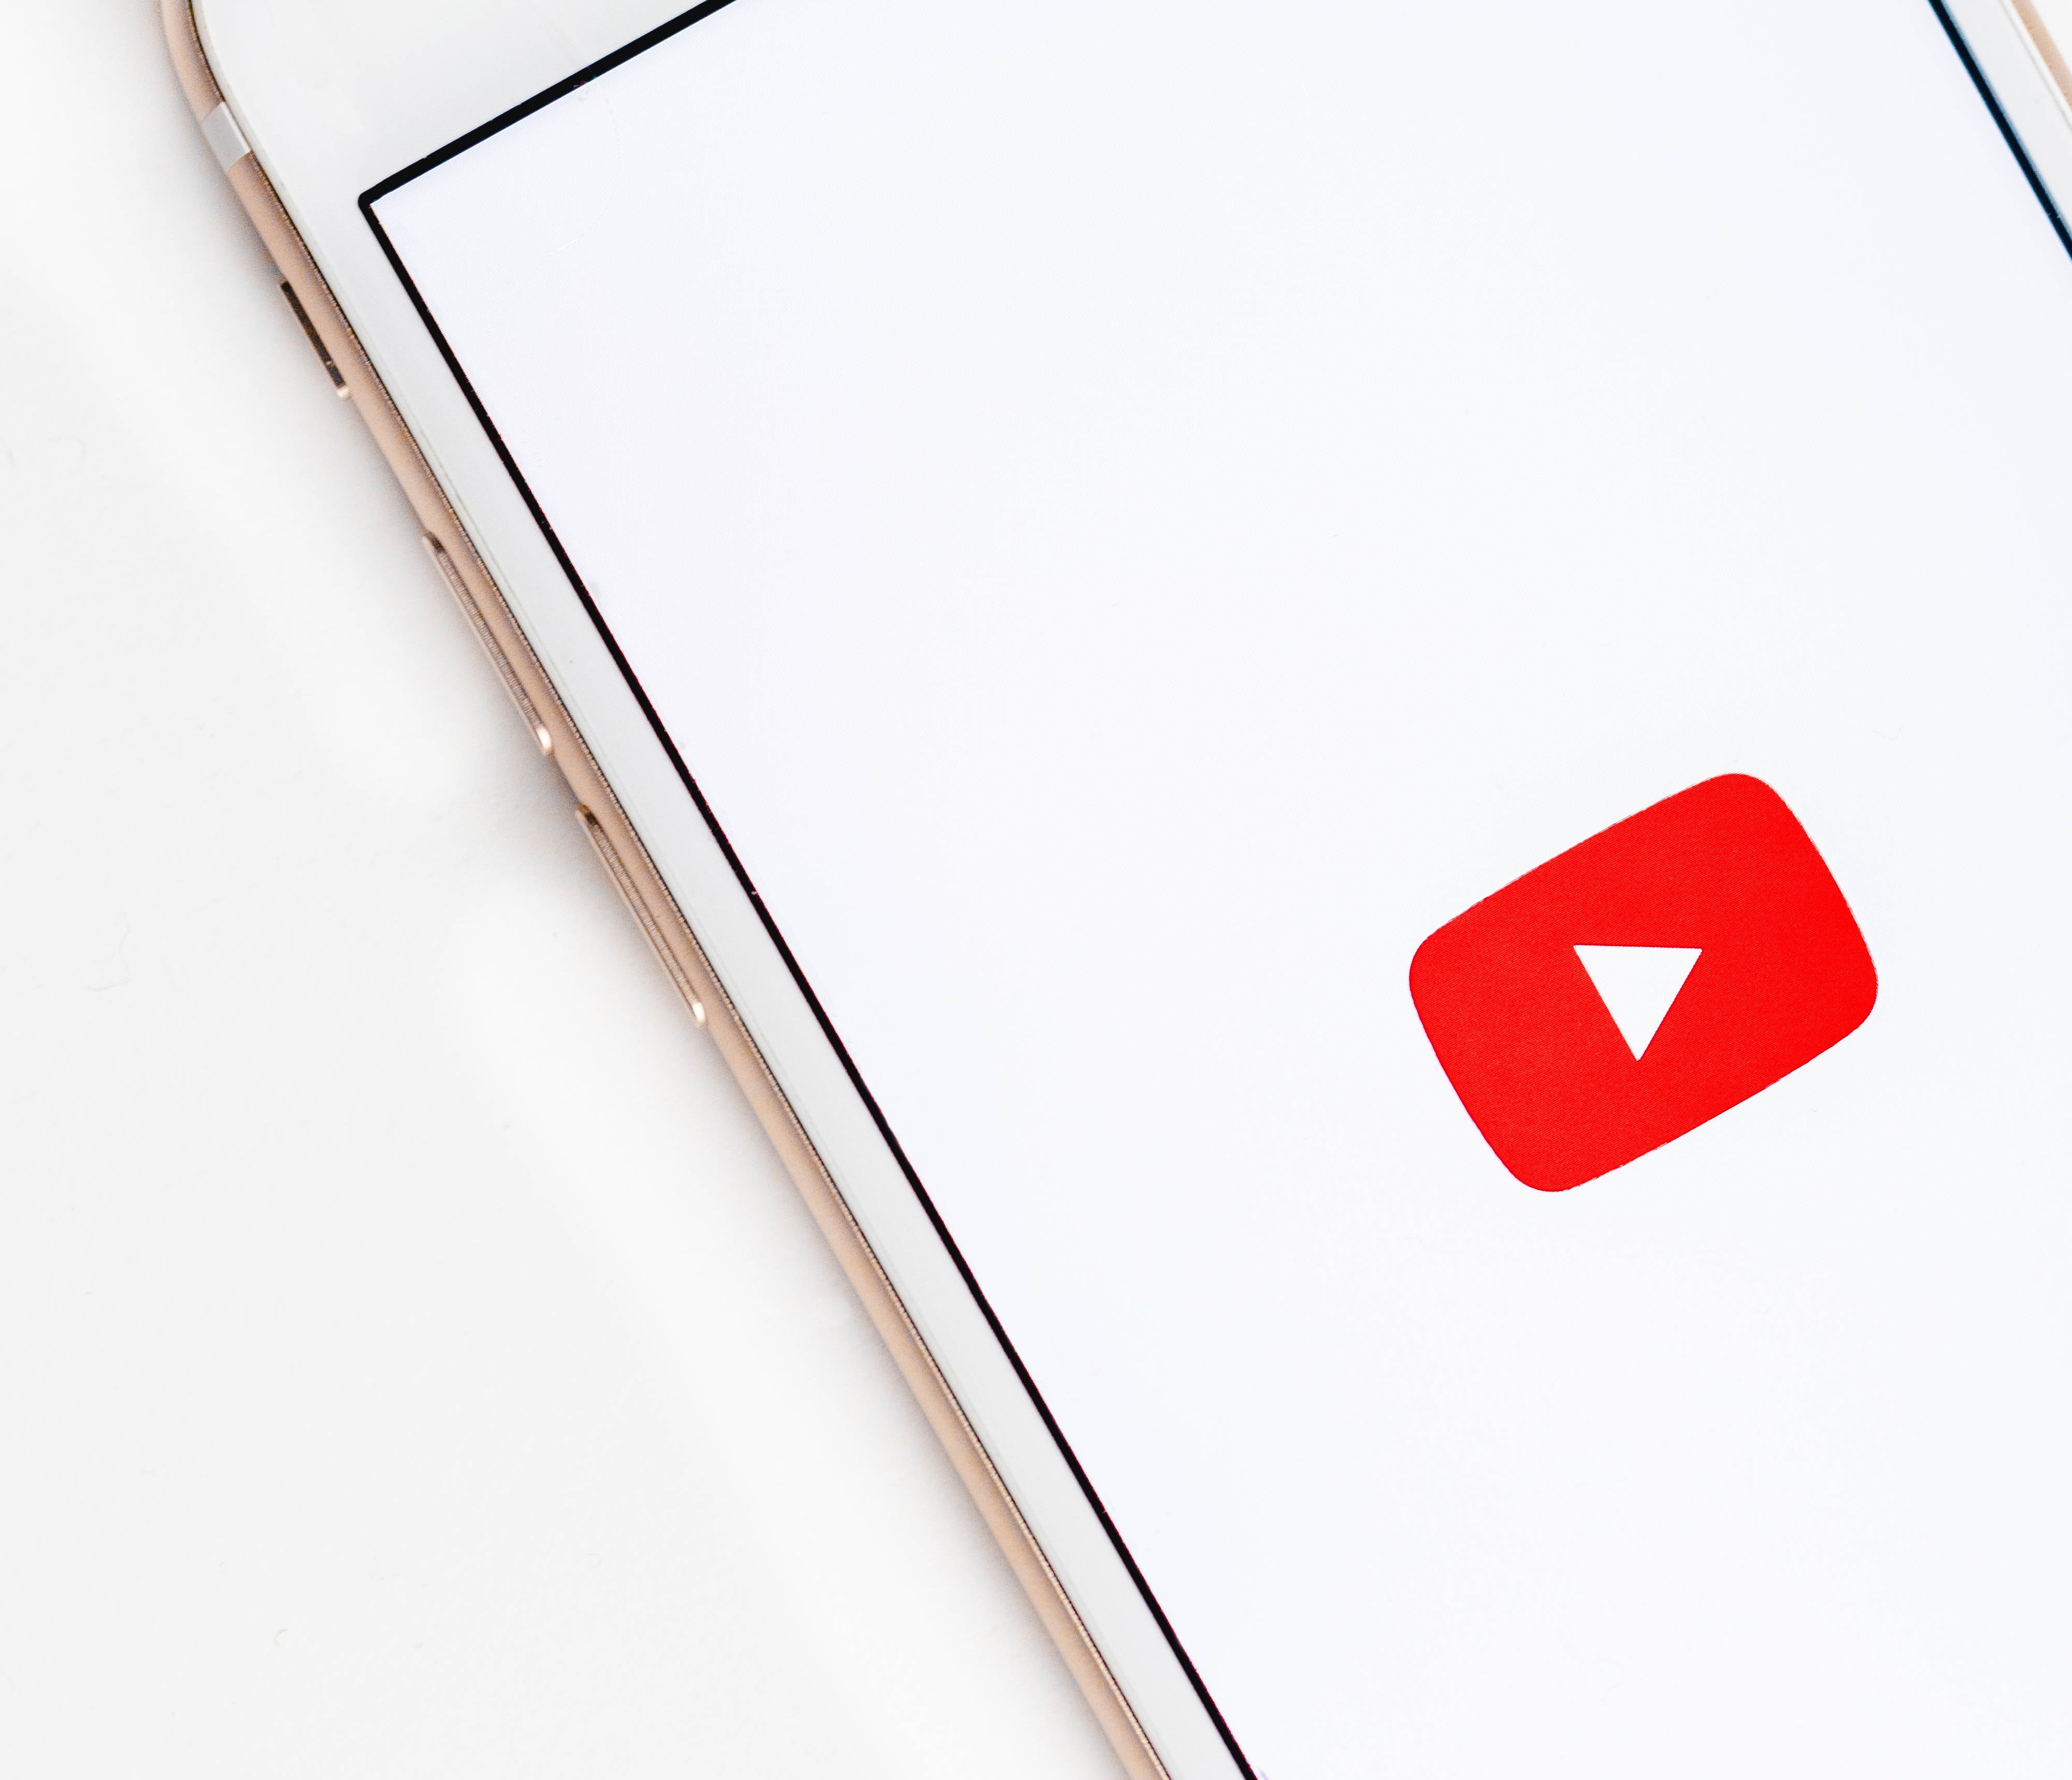 YouTube’s ‘Self-Certification’ guidelines detail what content is “suitable for all advertisers”